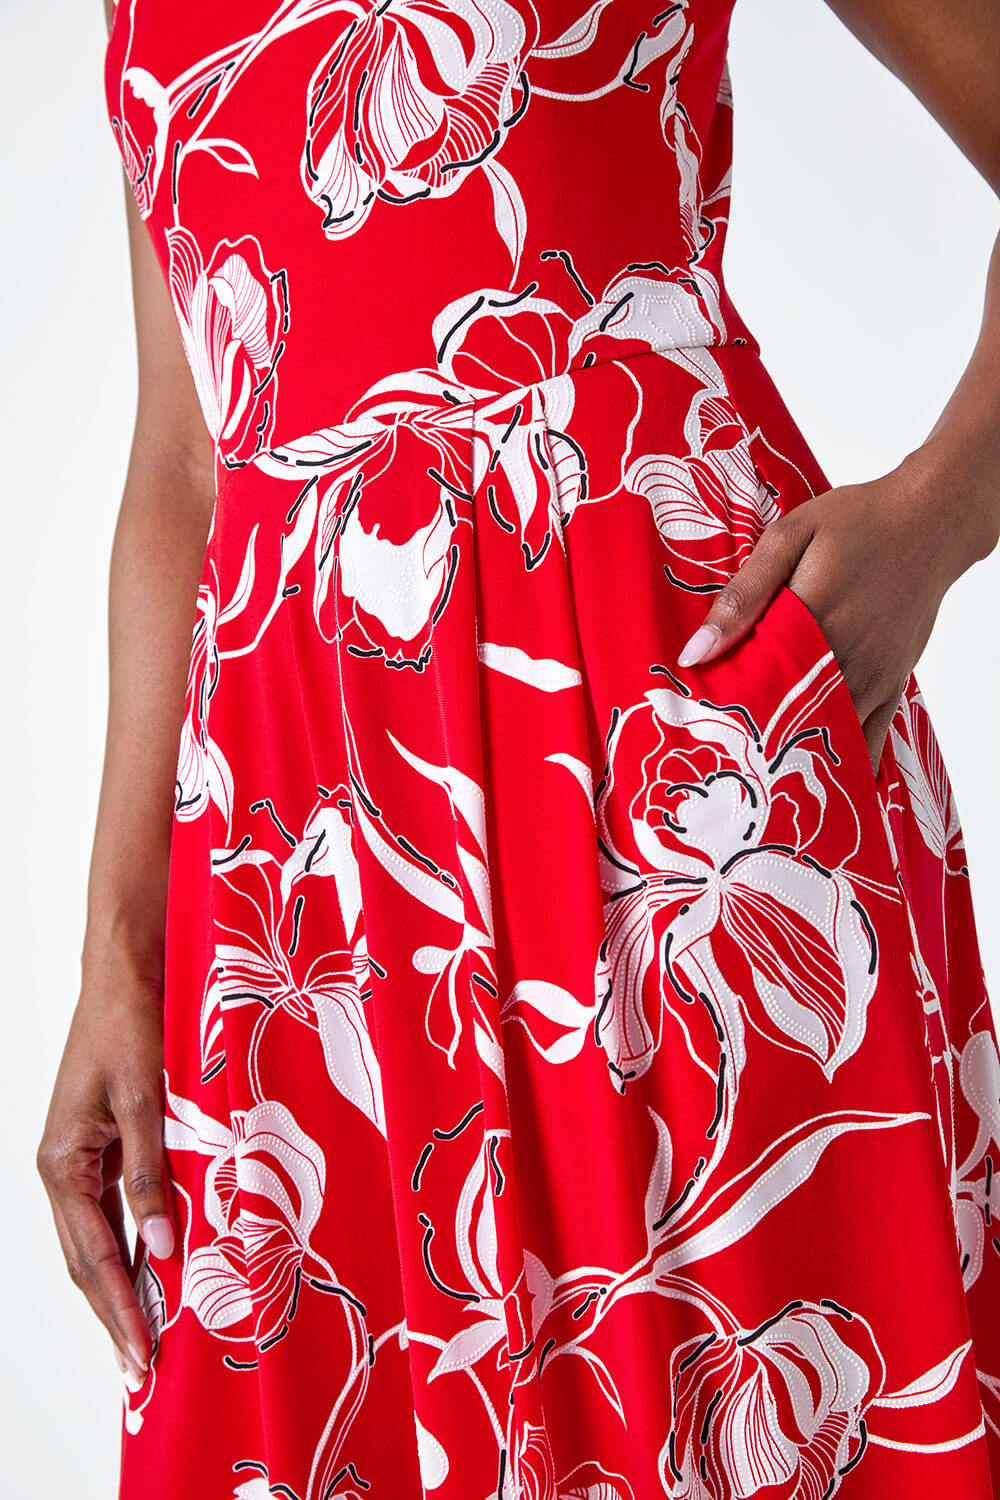 Red Textured Floral Print Midi Stretch Dress, Image 5 of 5